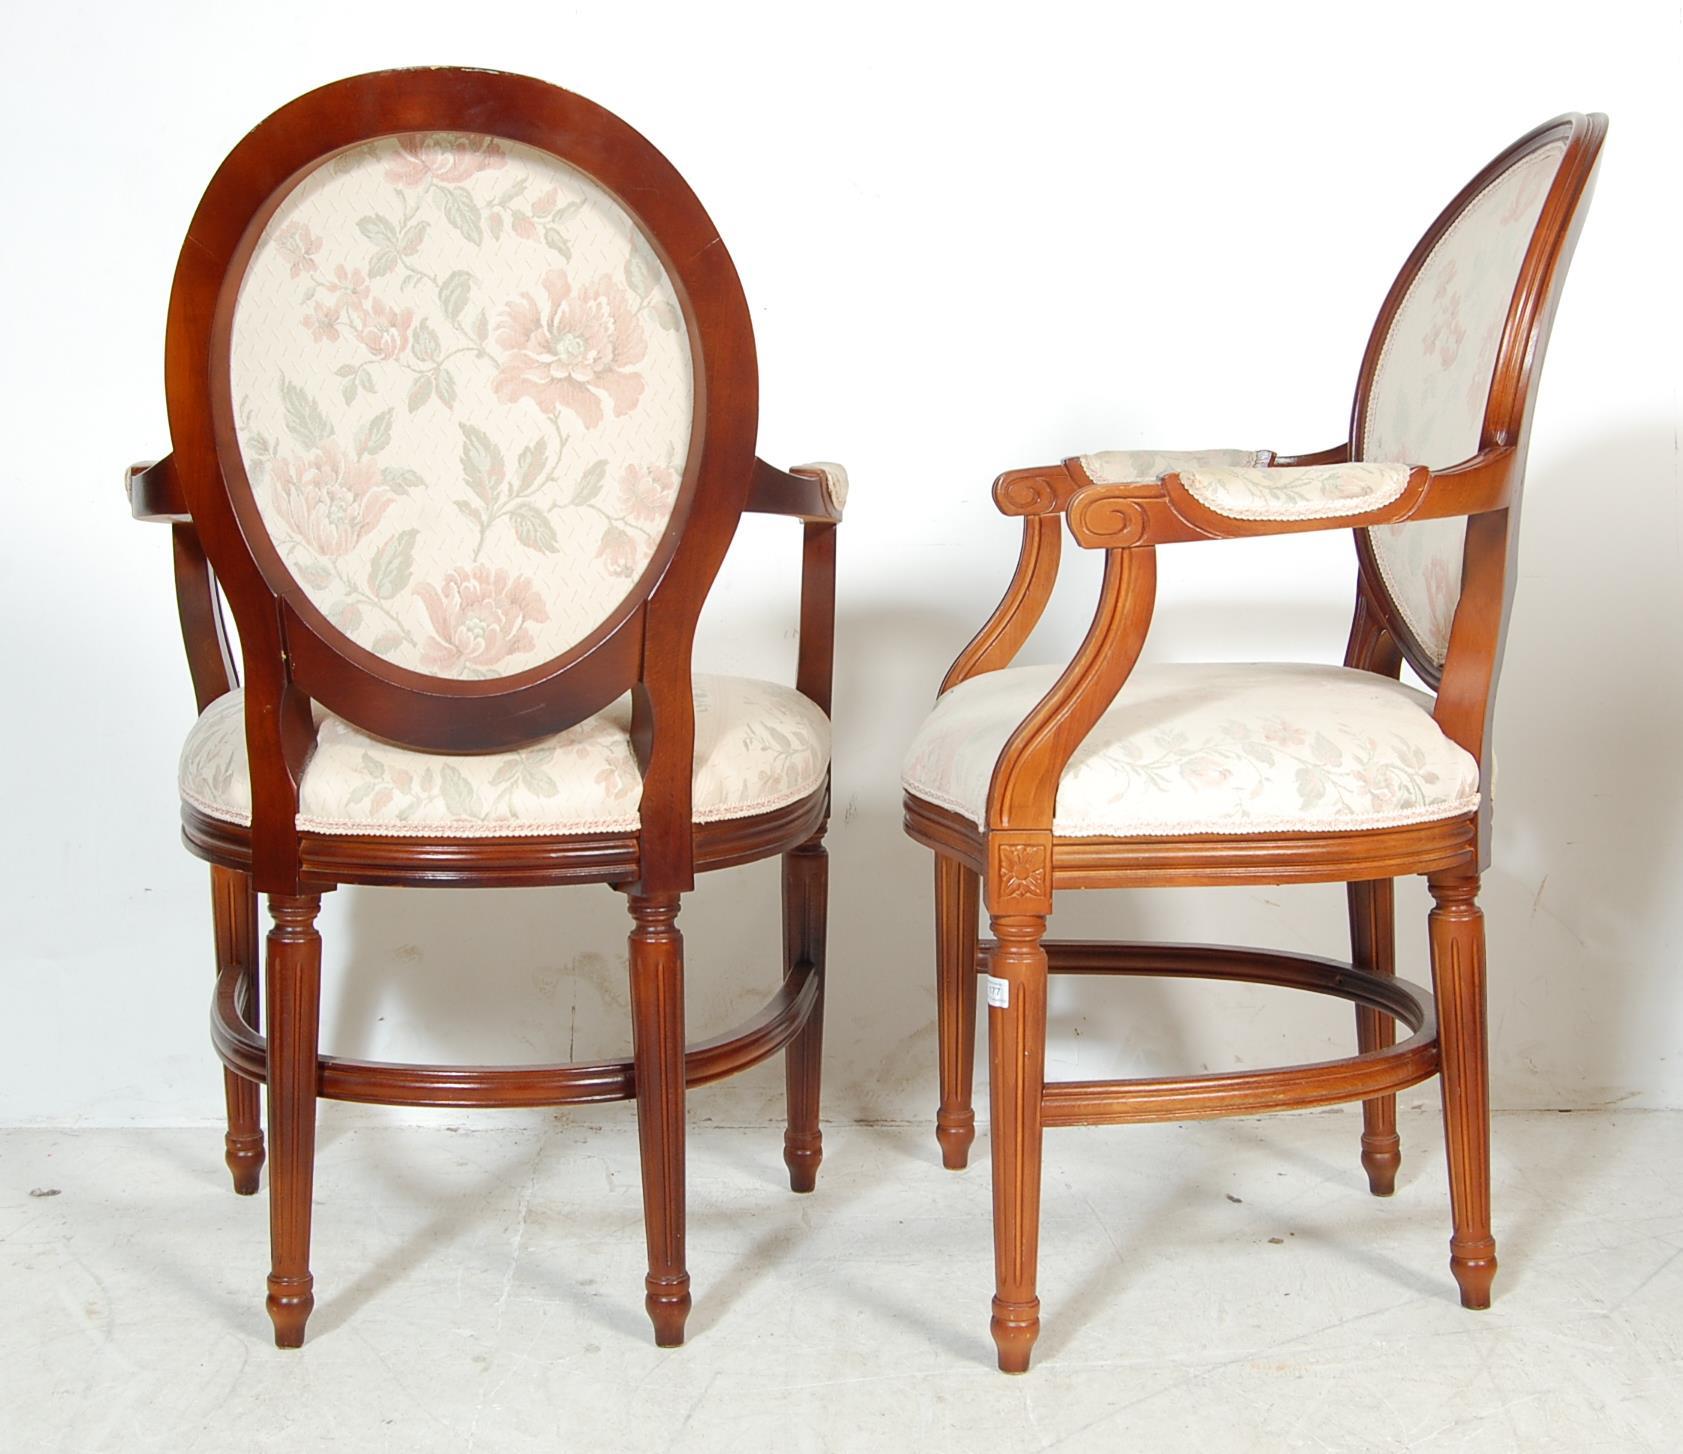 SET OF 4 FRENCH MAHOGANY FAUTEUIL ARMCHAIRS - Image 4 of 4